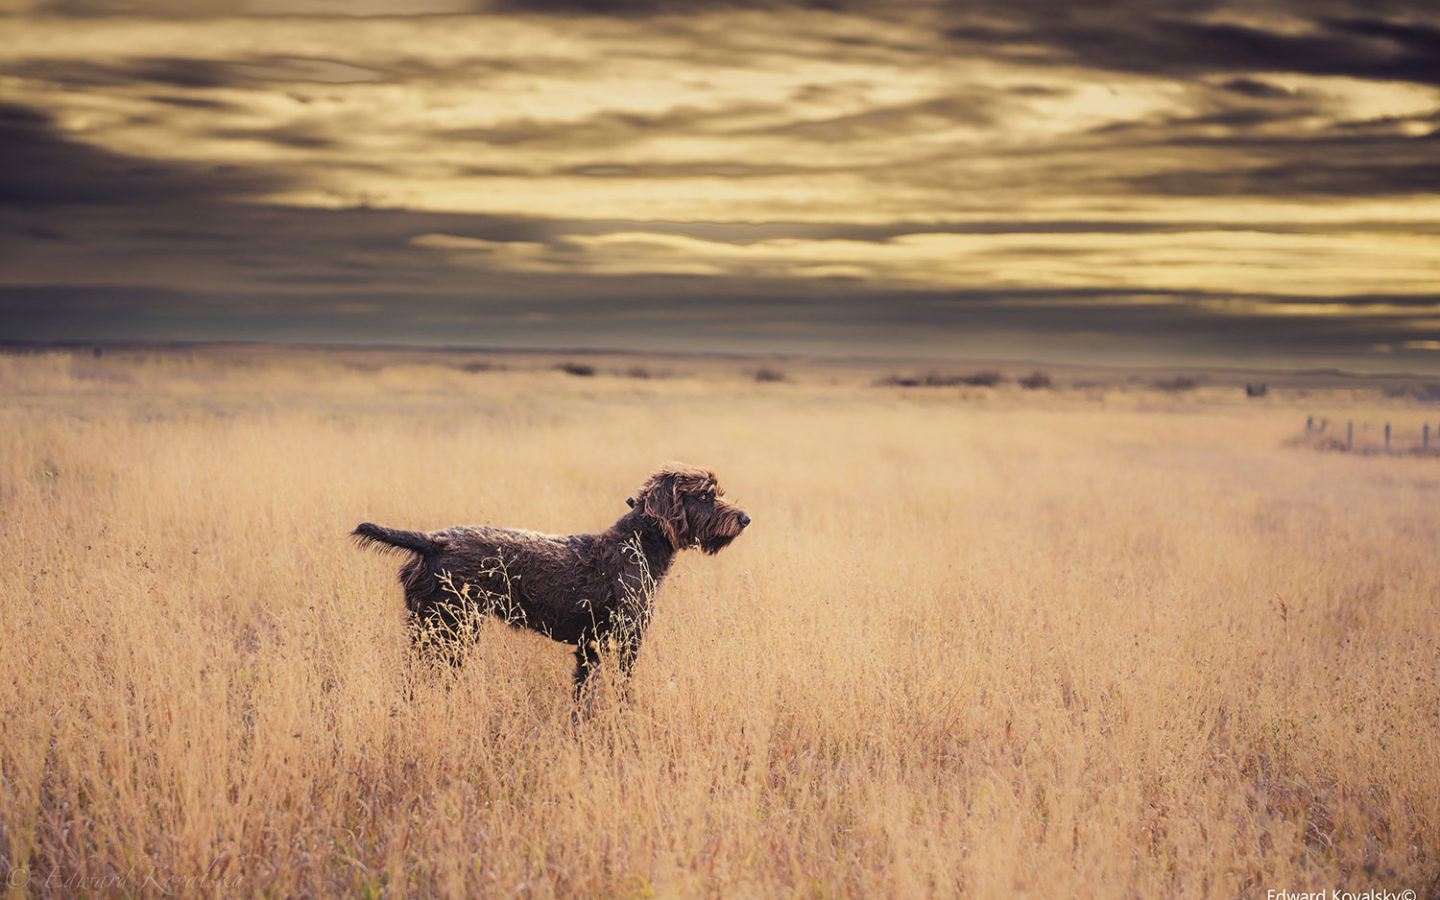 a hunting dog standing in a large open field with tall brown grass